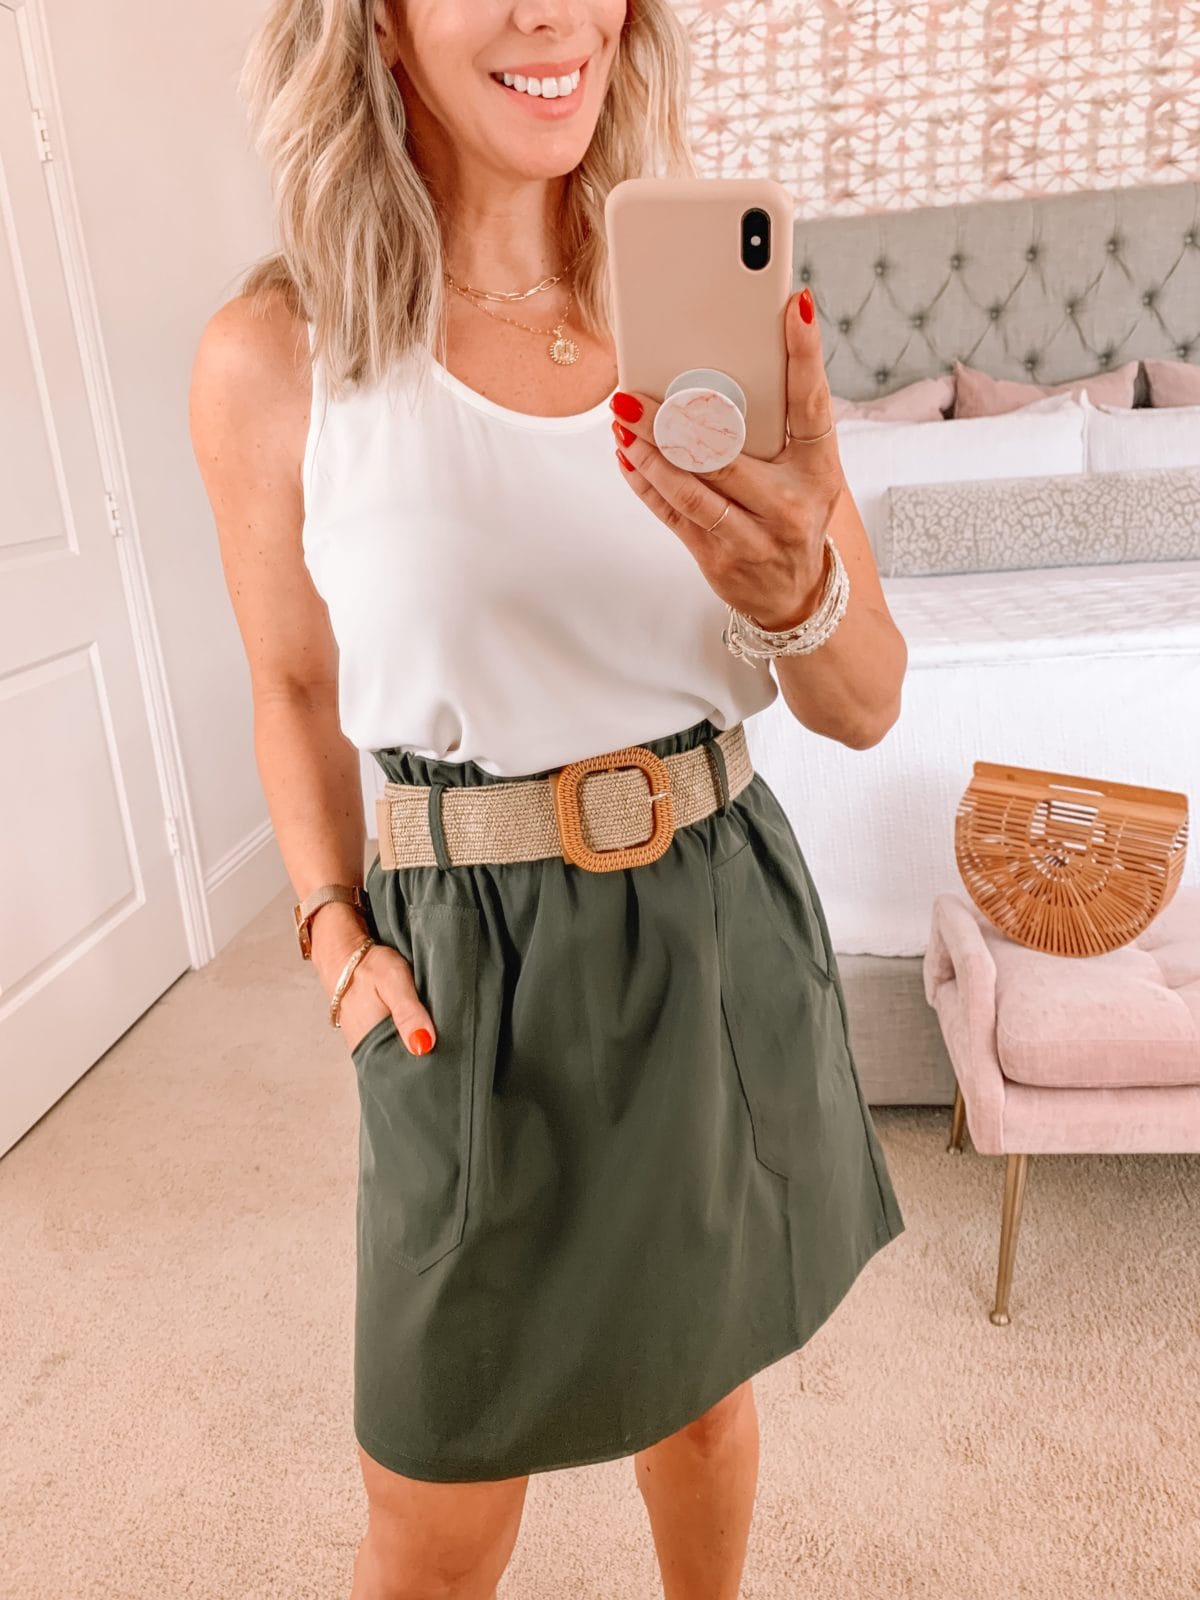 Amazon Fashion Faves, White Tank, Olive Skirt, Stretchy Belt, Bamboo Clutch, Sandals 